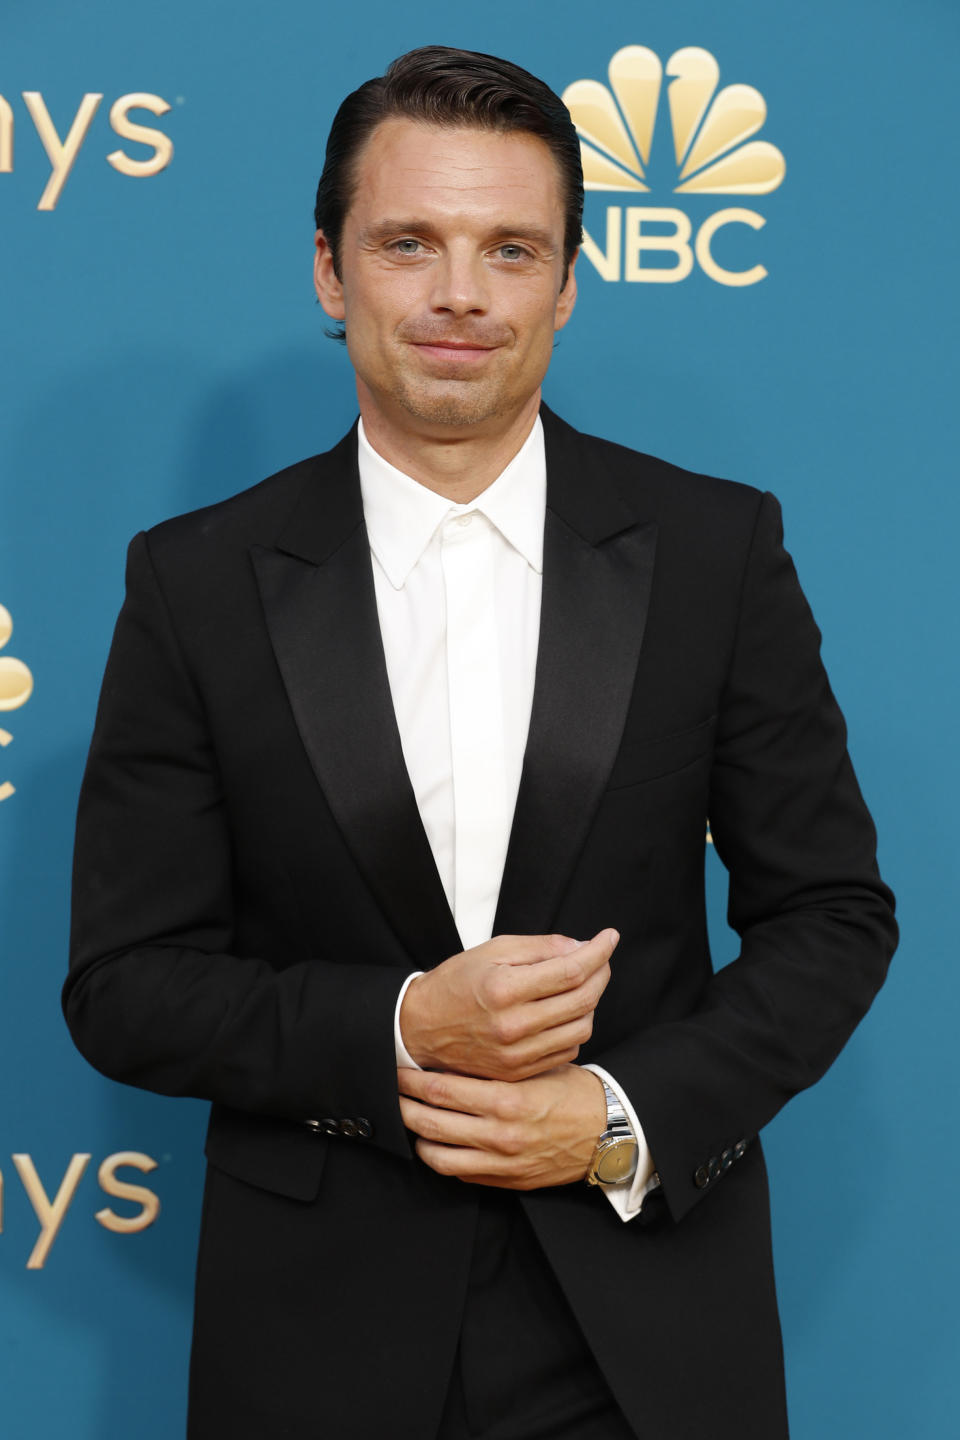 LOS ANGELES, CALIFORNIA - SEPTEMBER 12: 74th ANNUAL PRIMETIME EMMY AWARDS -- Pictured: Sebastian Stan arrives to the 74th Annual Primetime Emmy Awards held at the Microsoft Theater on September 12, 2022. — (Photo by Trae Patton/NBC via Getty Images)